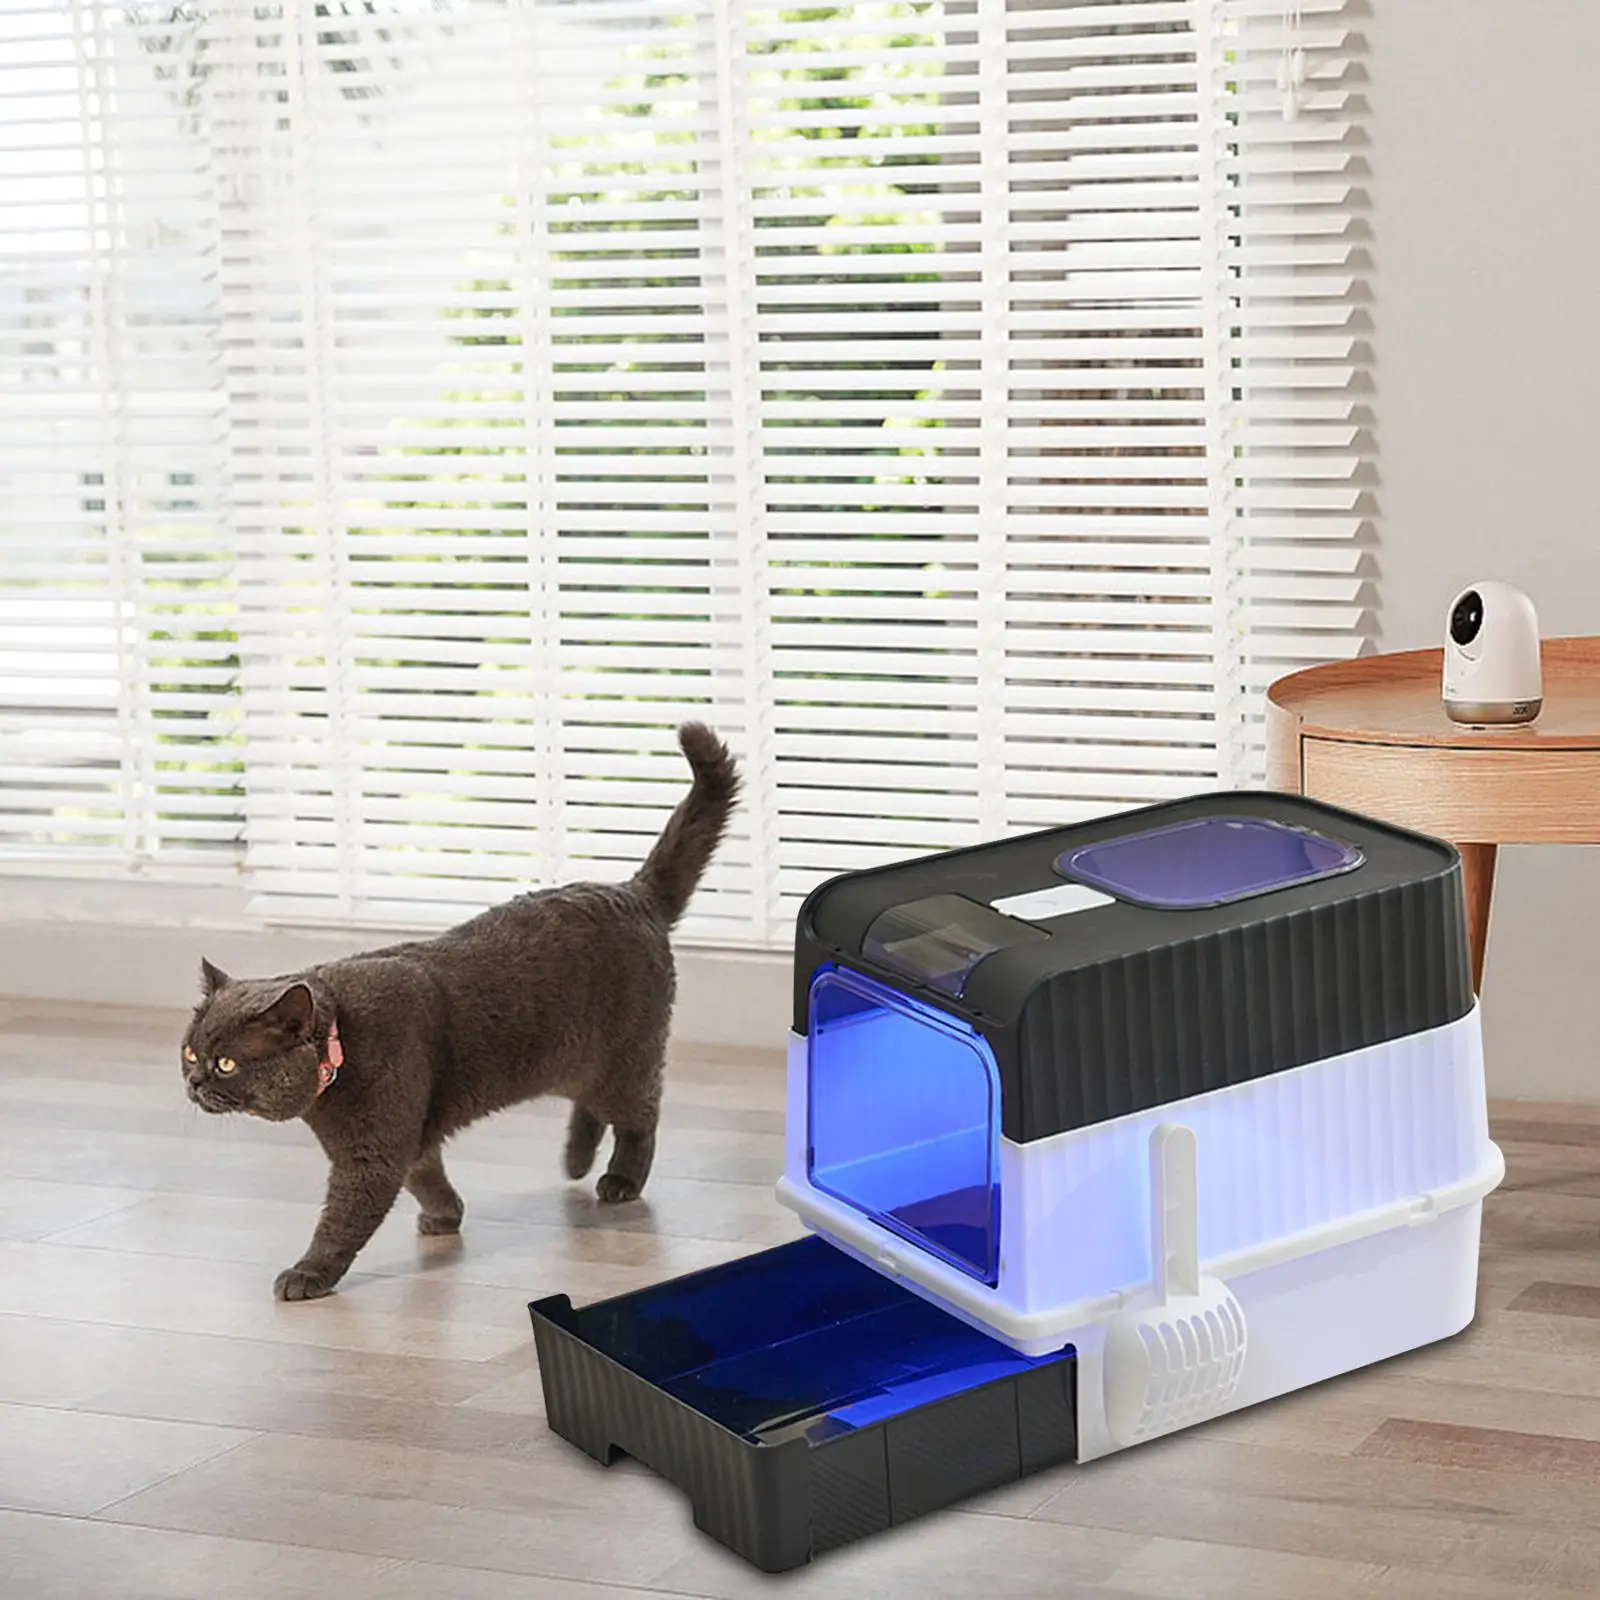 Fully Enclosed Cat Litter Box Easy to Carry and Clean Sandbox with Front Door Hooded Cat Toilet with Lid for Small Animals